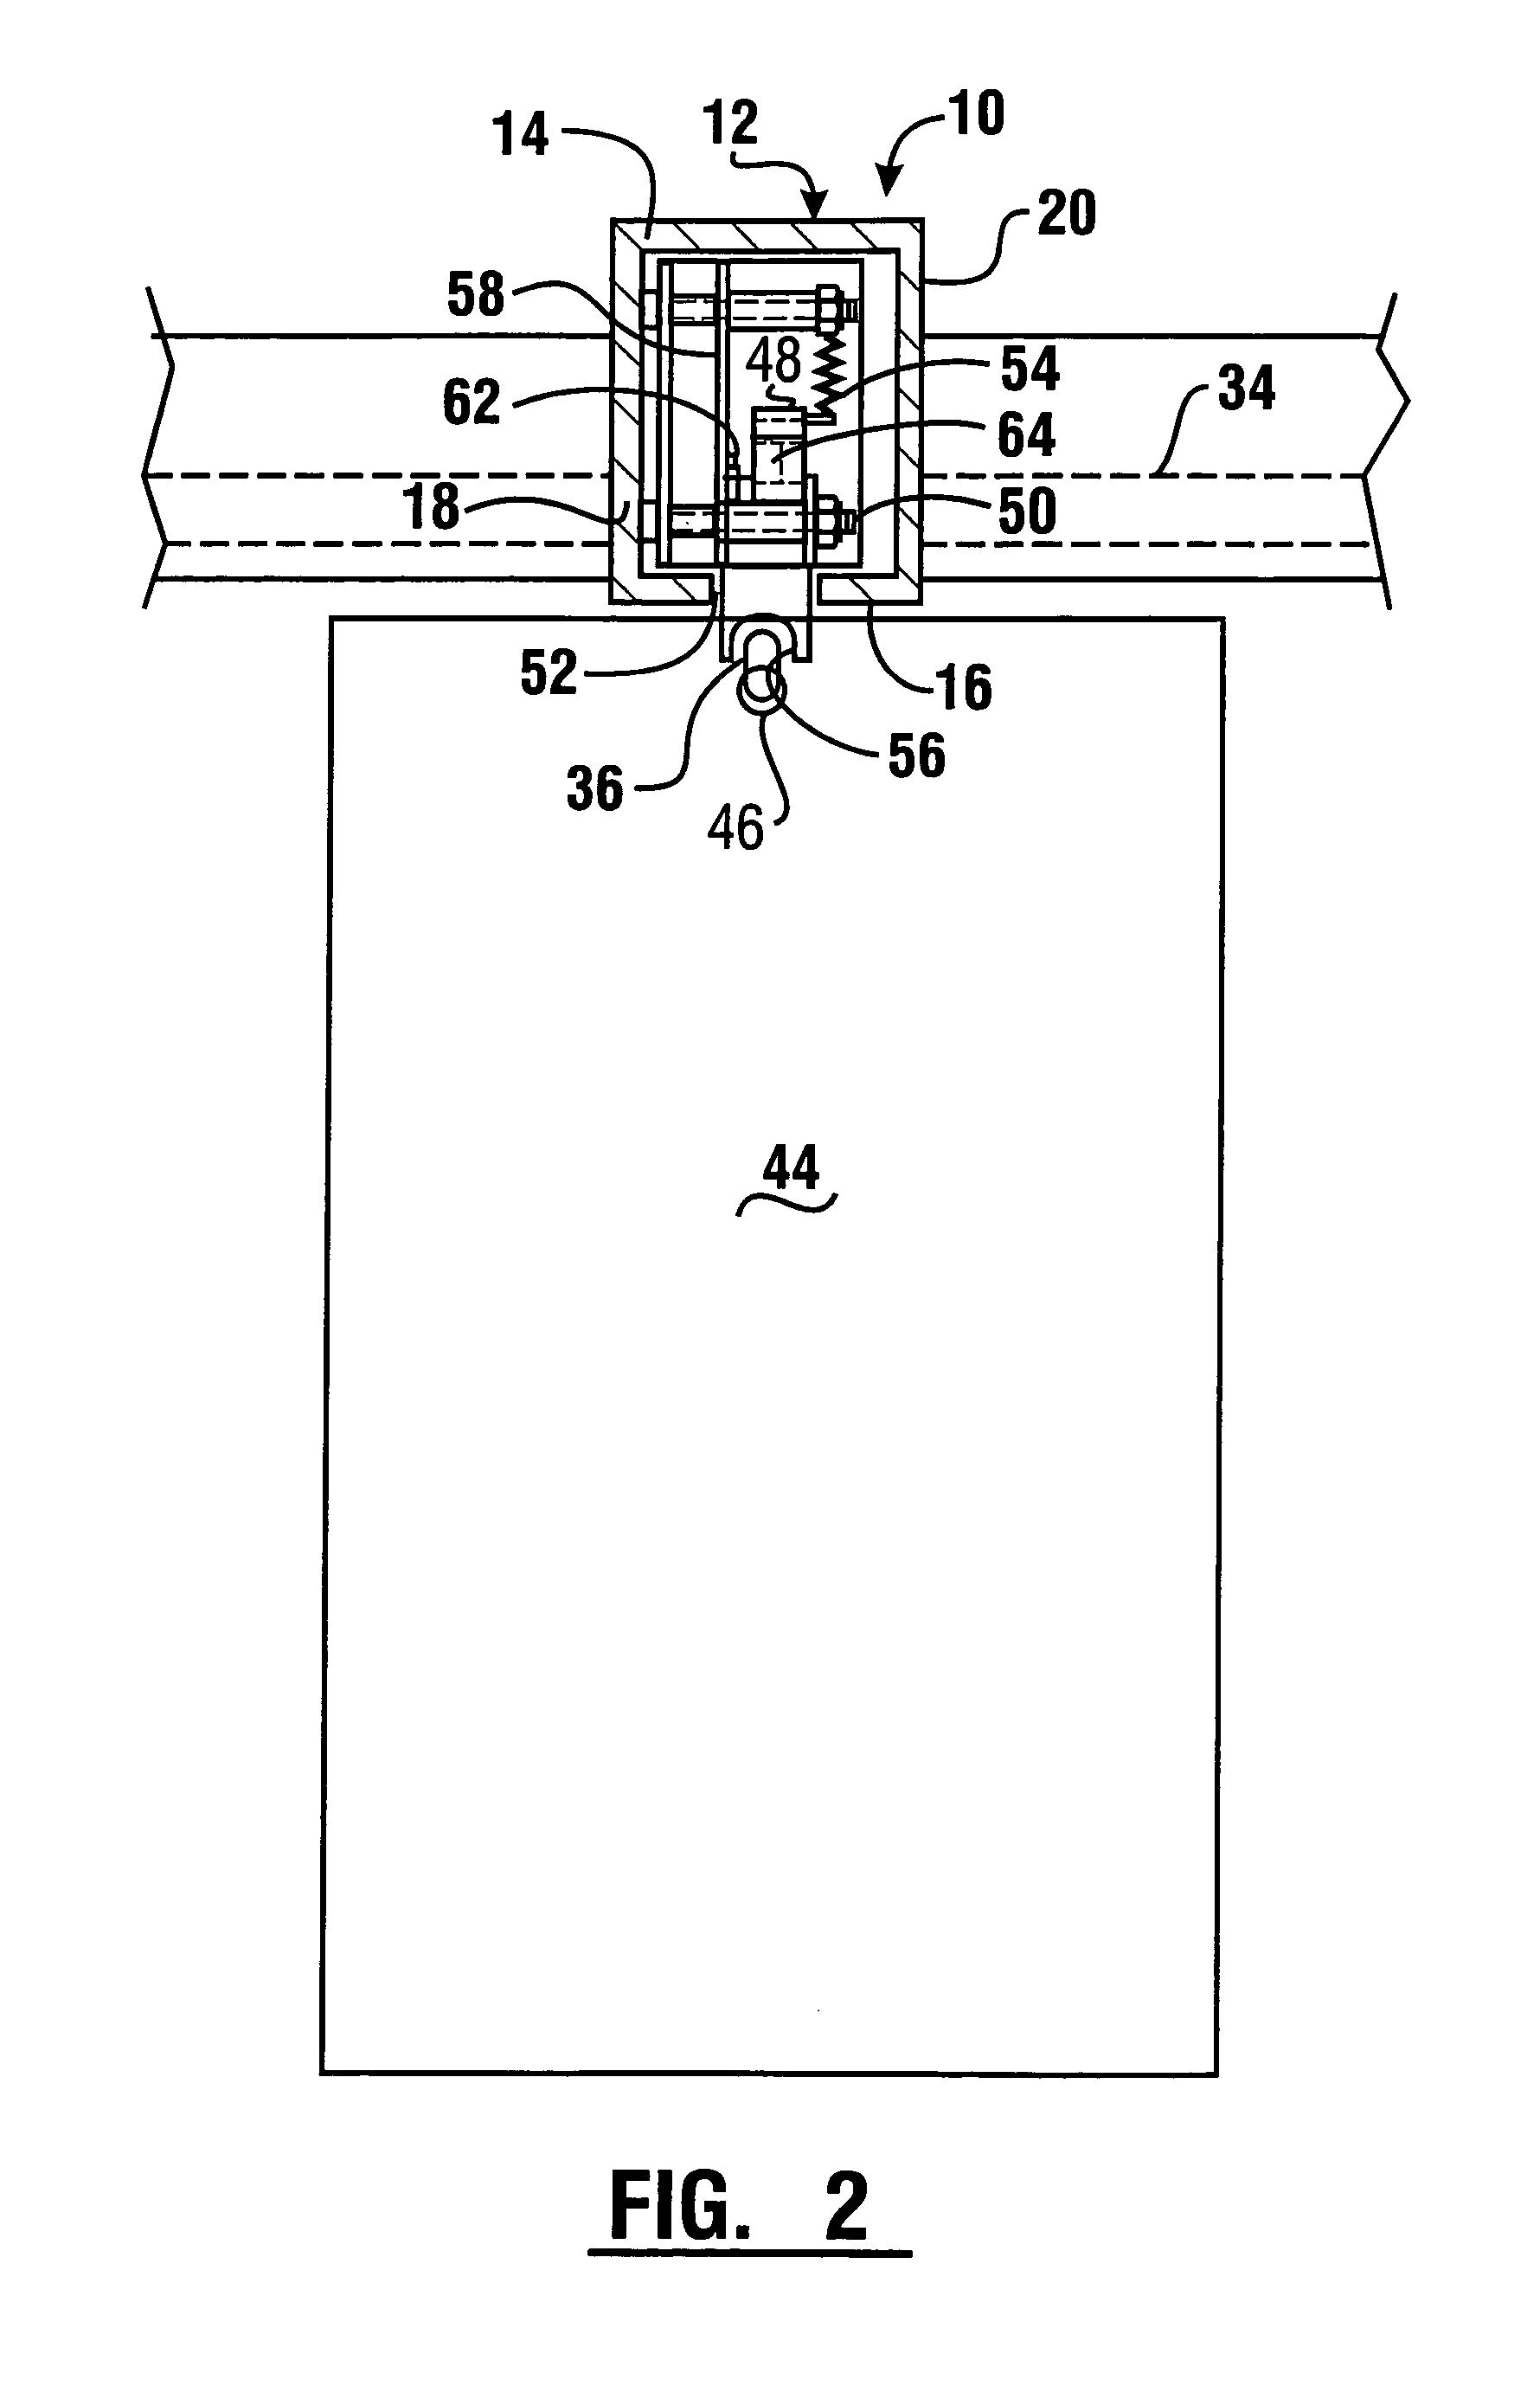 Method of tracking and despensing medical items to patients through self service delivery system